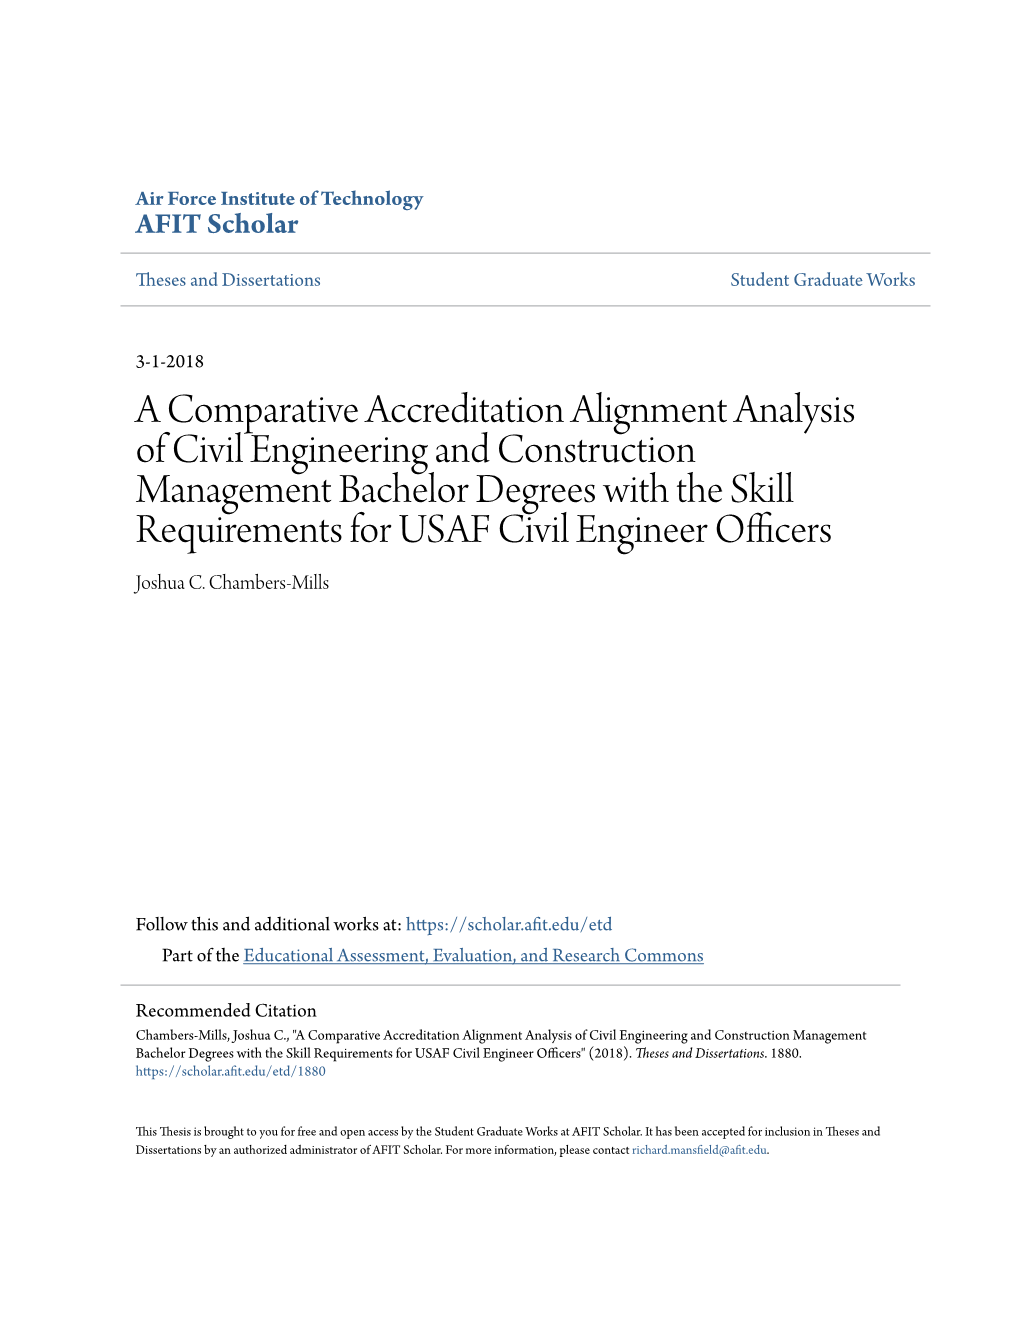 A Comparative Accreditation Alignment Analysis of Civil